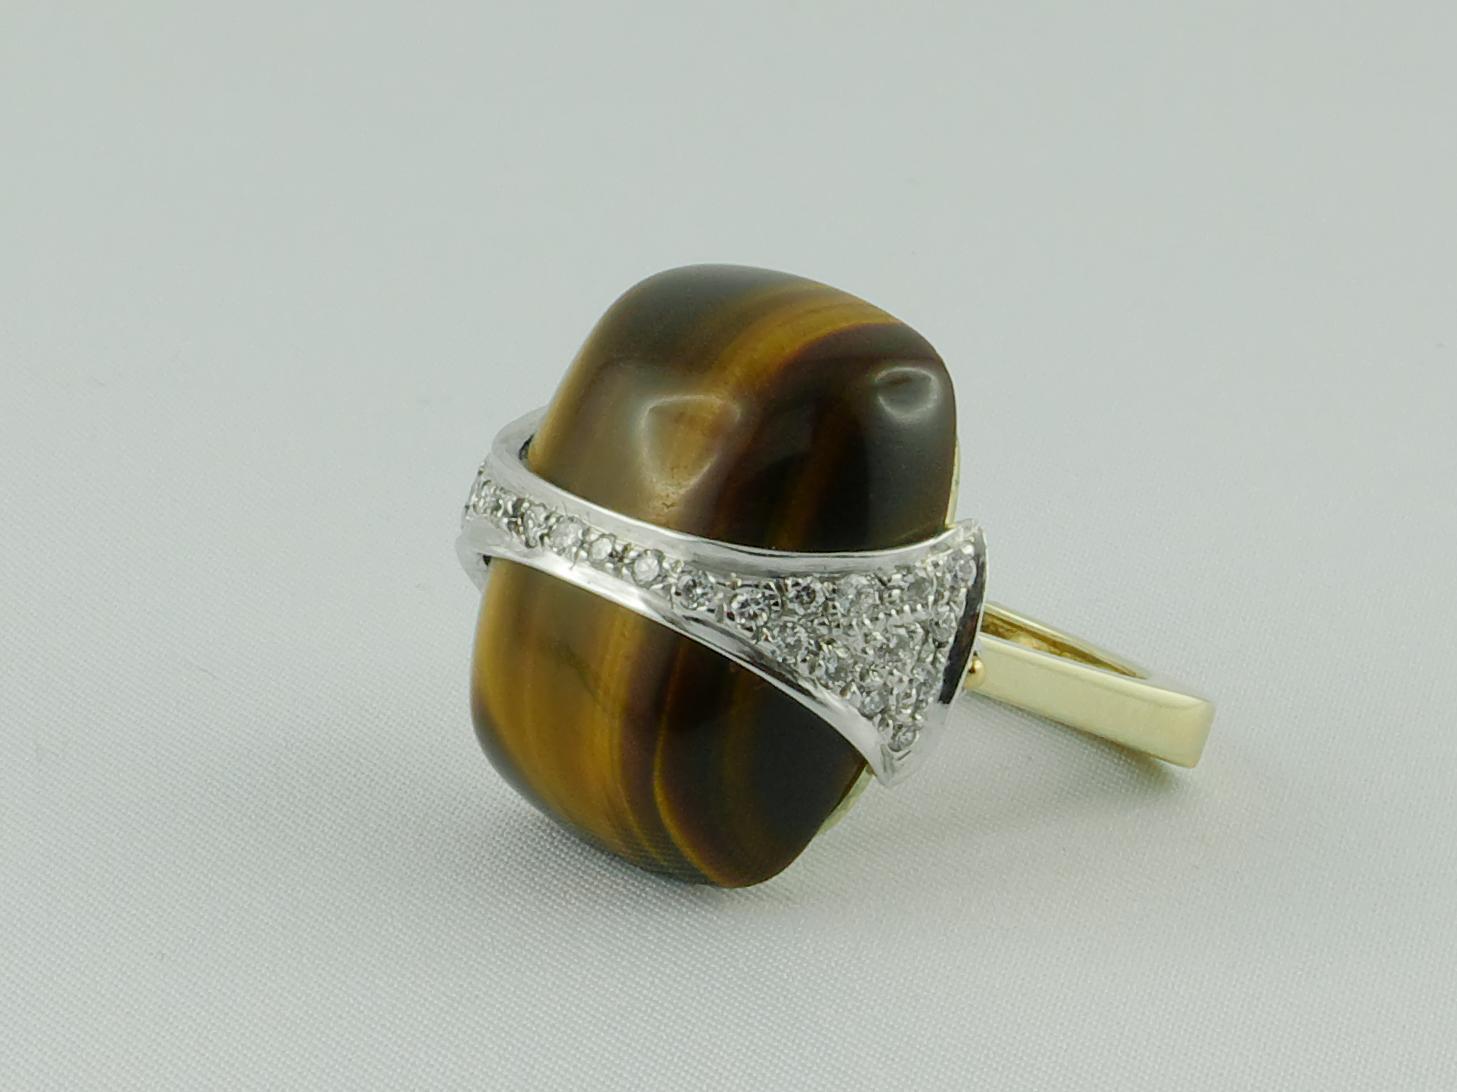 This ring is 18 karat yellow and white gold with tiger eye and is set with about 1.25 carat  horizontal strip of Diamonds running through the center. The bold and geometric design make it chic, fashionable and extremely wearable.  Signed La Triomphe